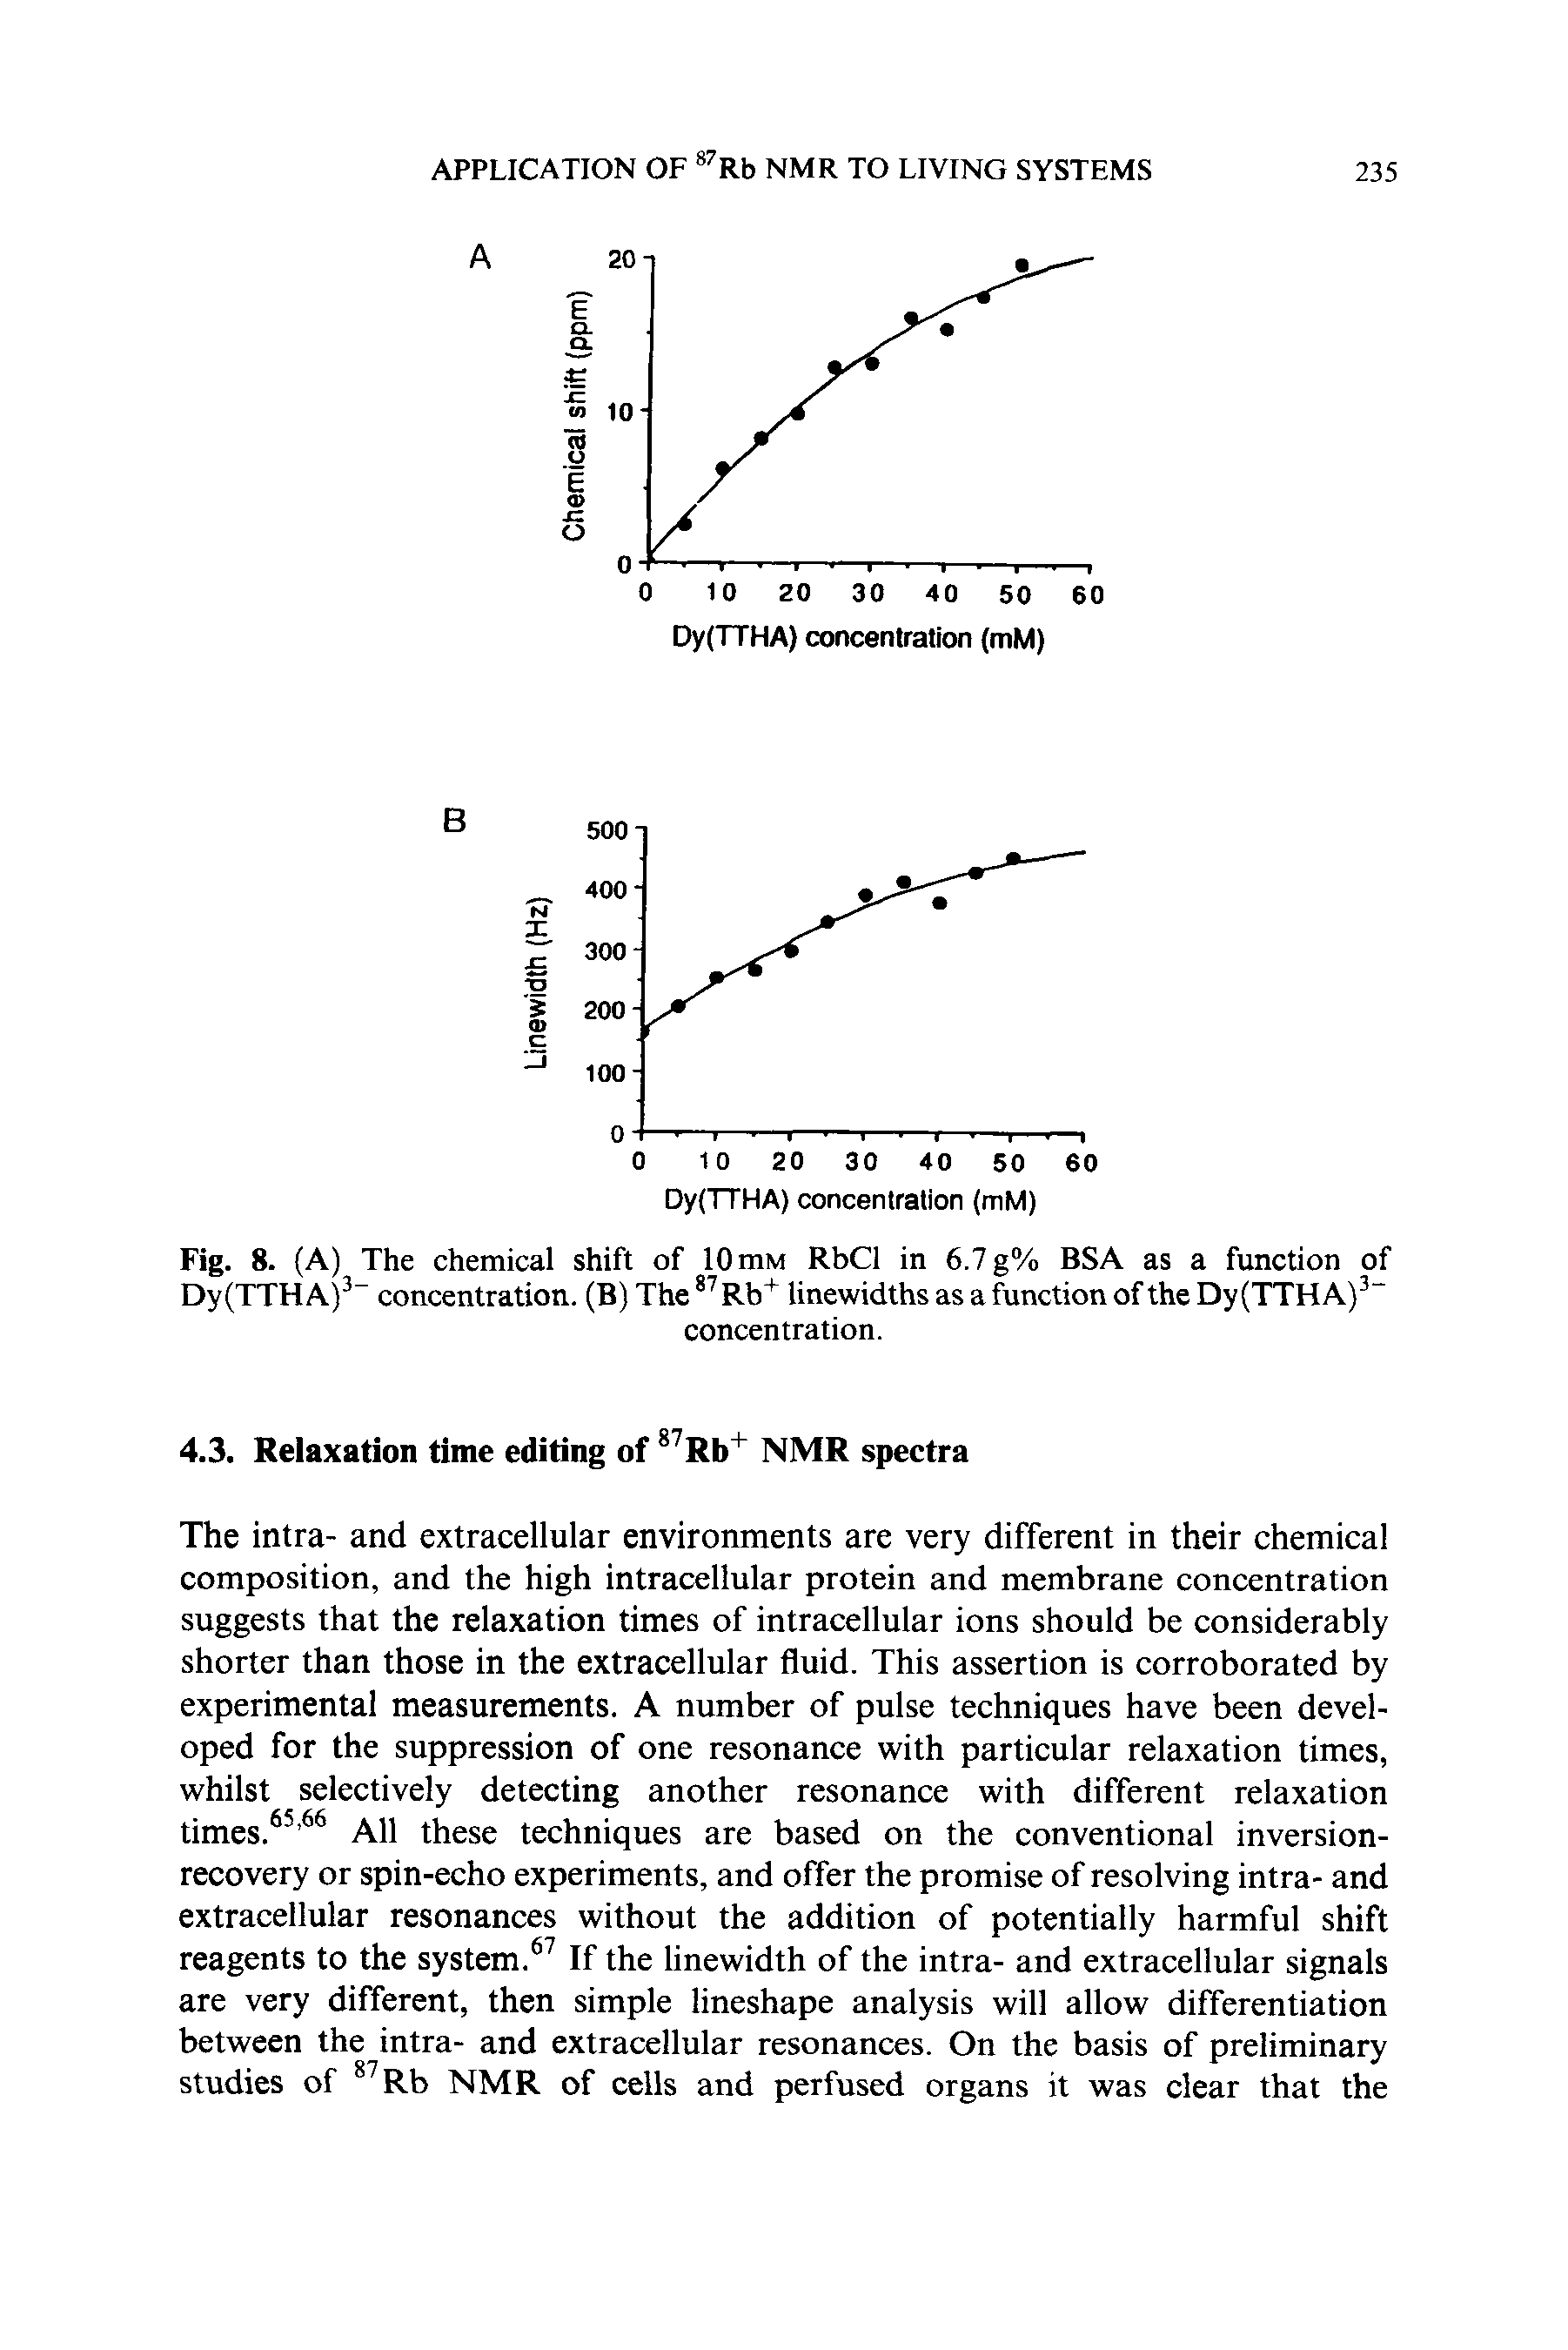 Fig. 8. (A) The chemical shift of 10 mM RbCl in 6.7 g% BSA as a function of Dy(TTHA)3- concentration. (B) The 87Rb+ linewidths as a function of the Dy(TTHA)3-...